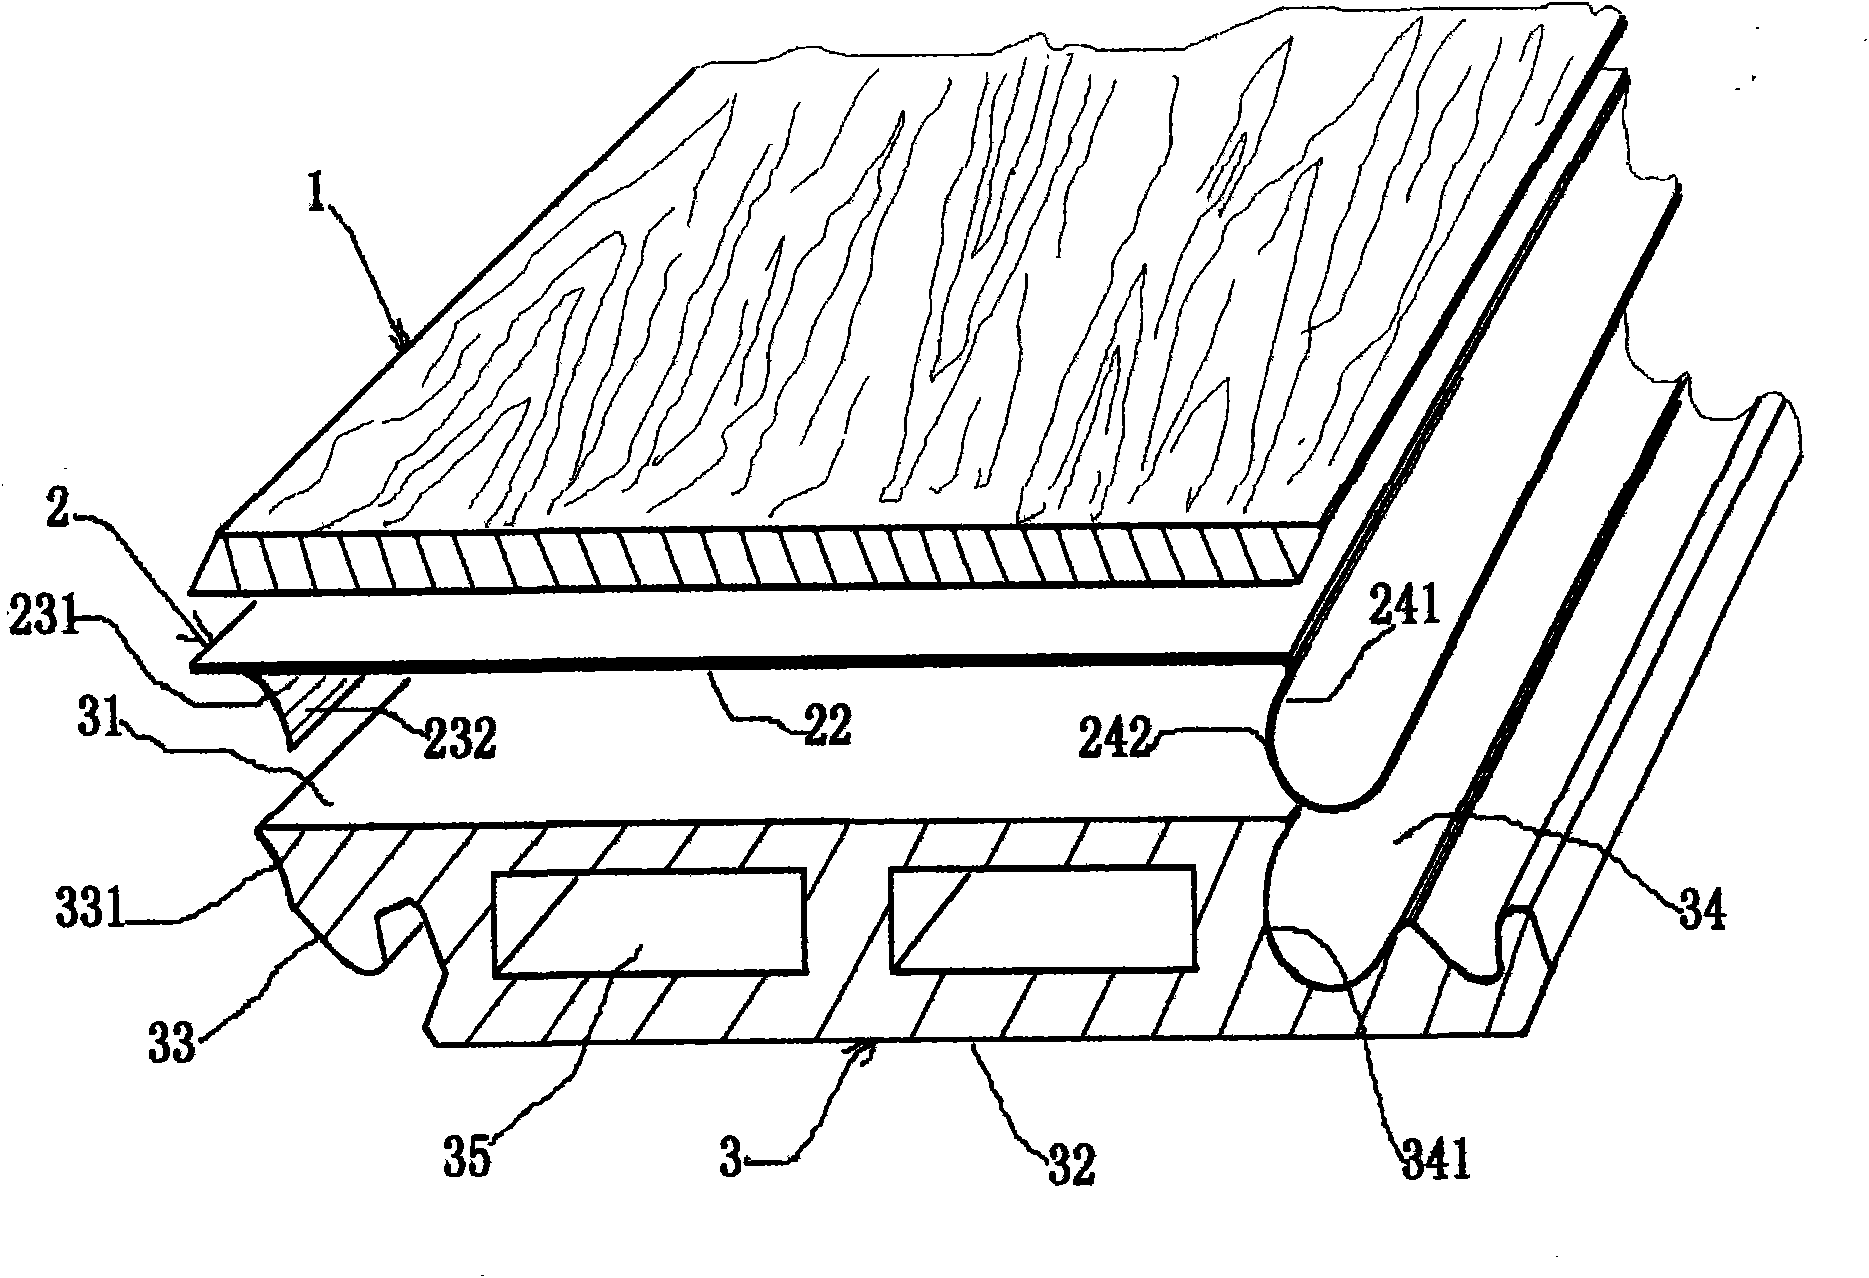 Geothermal floor and junction structure thereof